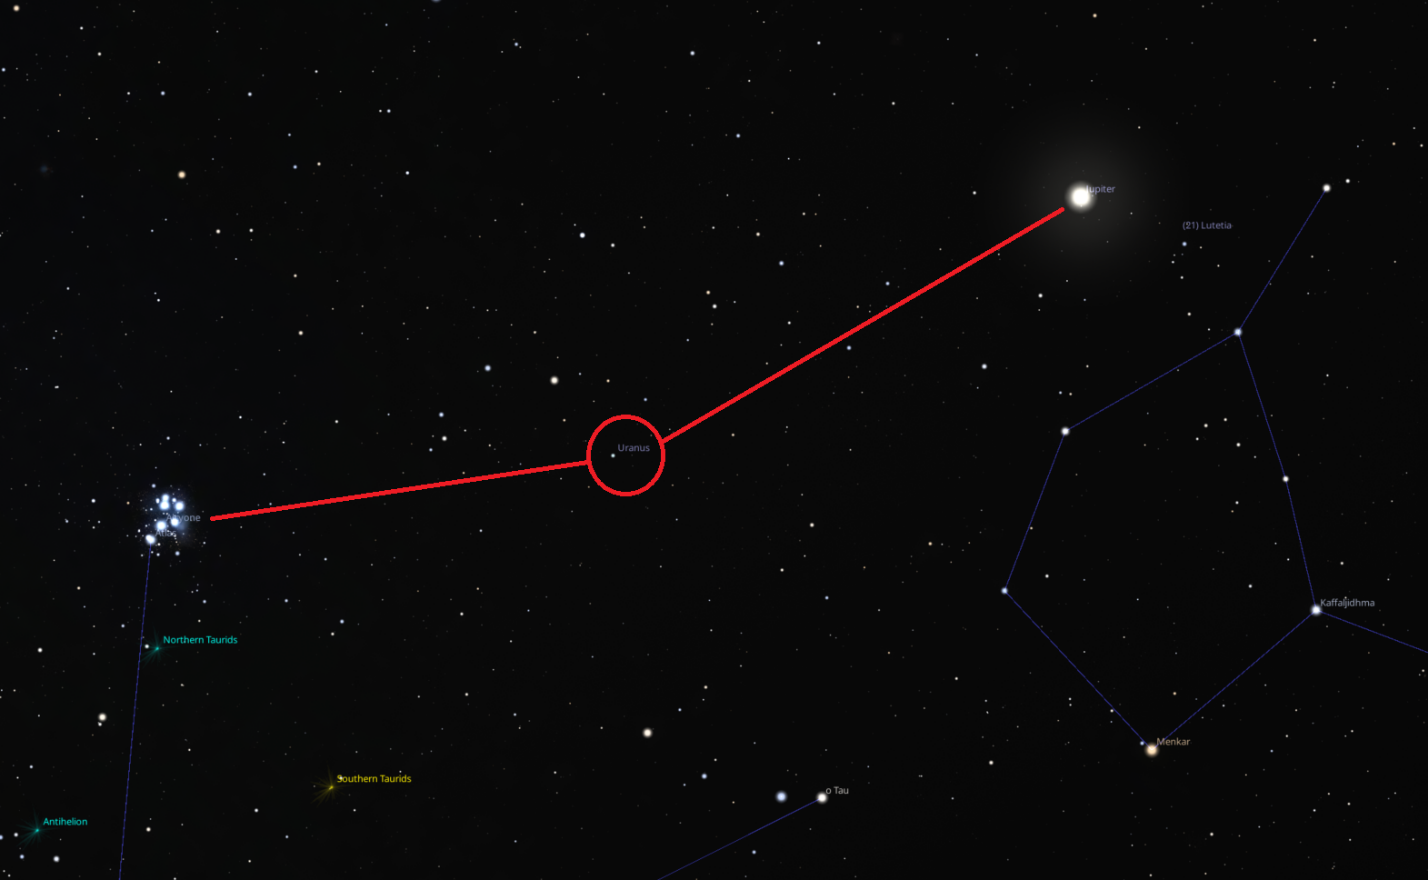 A star map showing The Pleiades and Jupiter with Uranus circled in red in between them